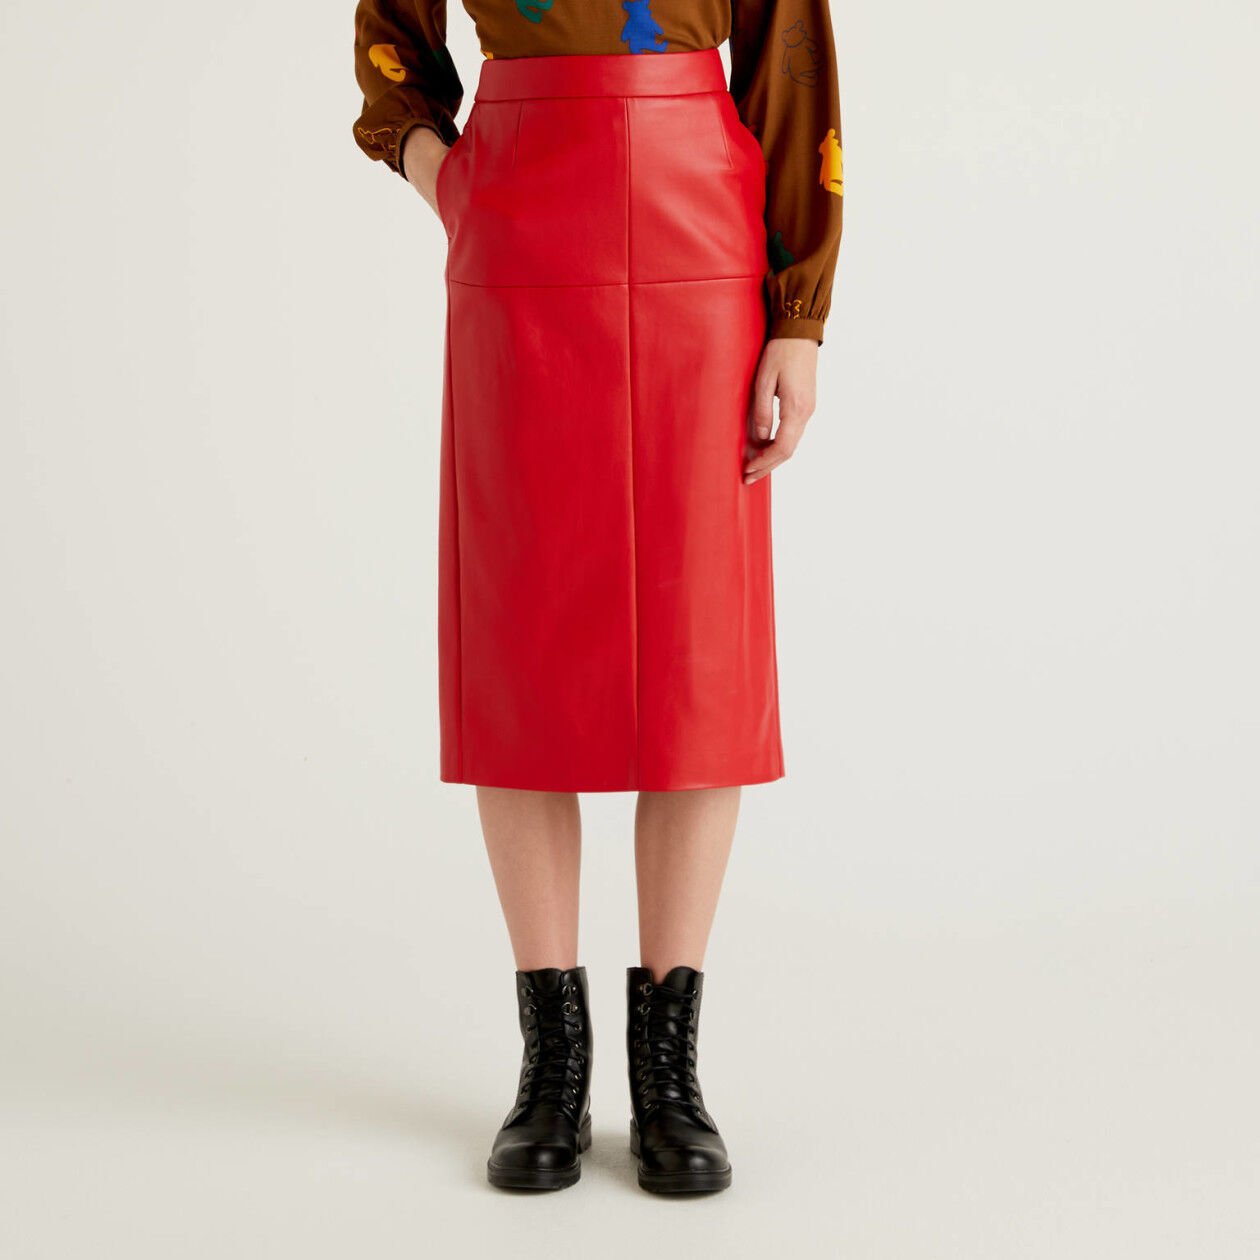 red leather pencil skirt buy